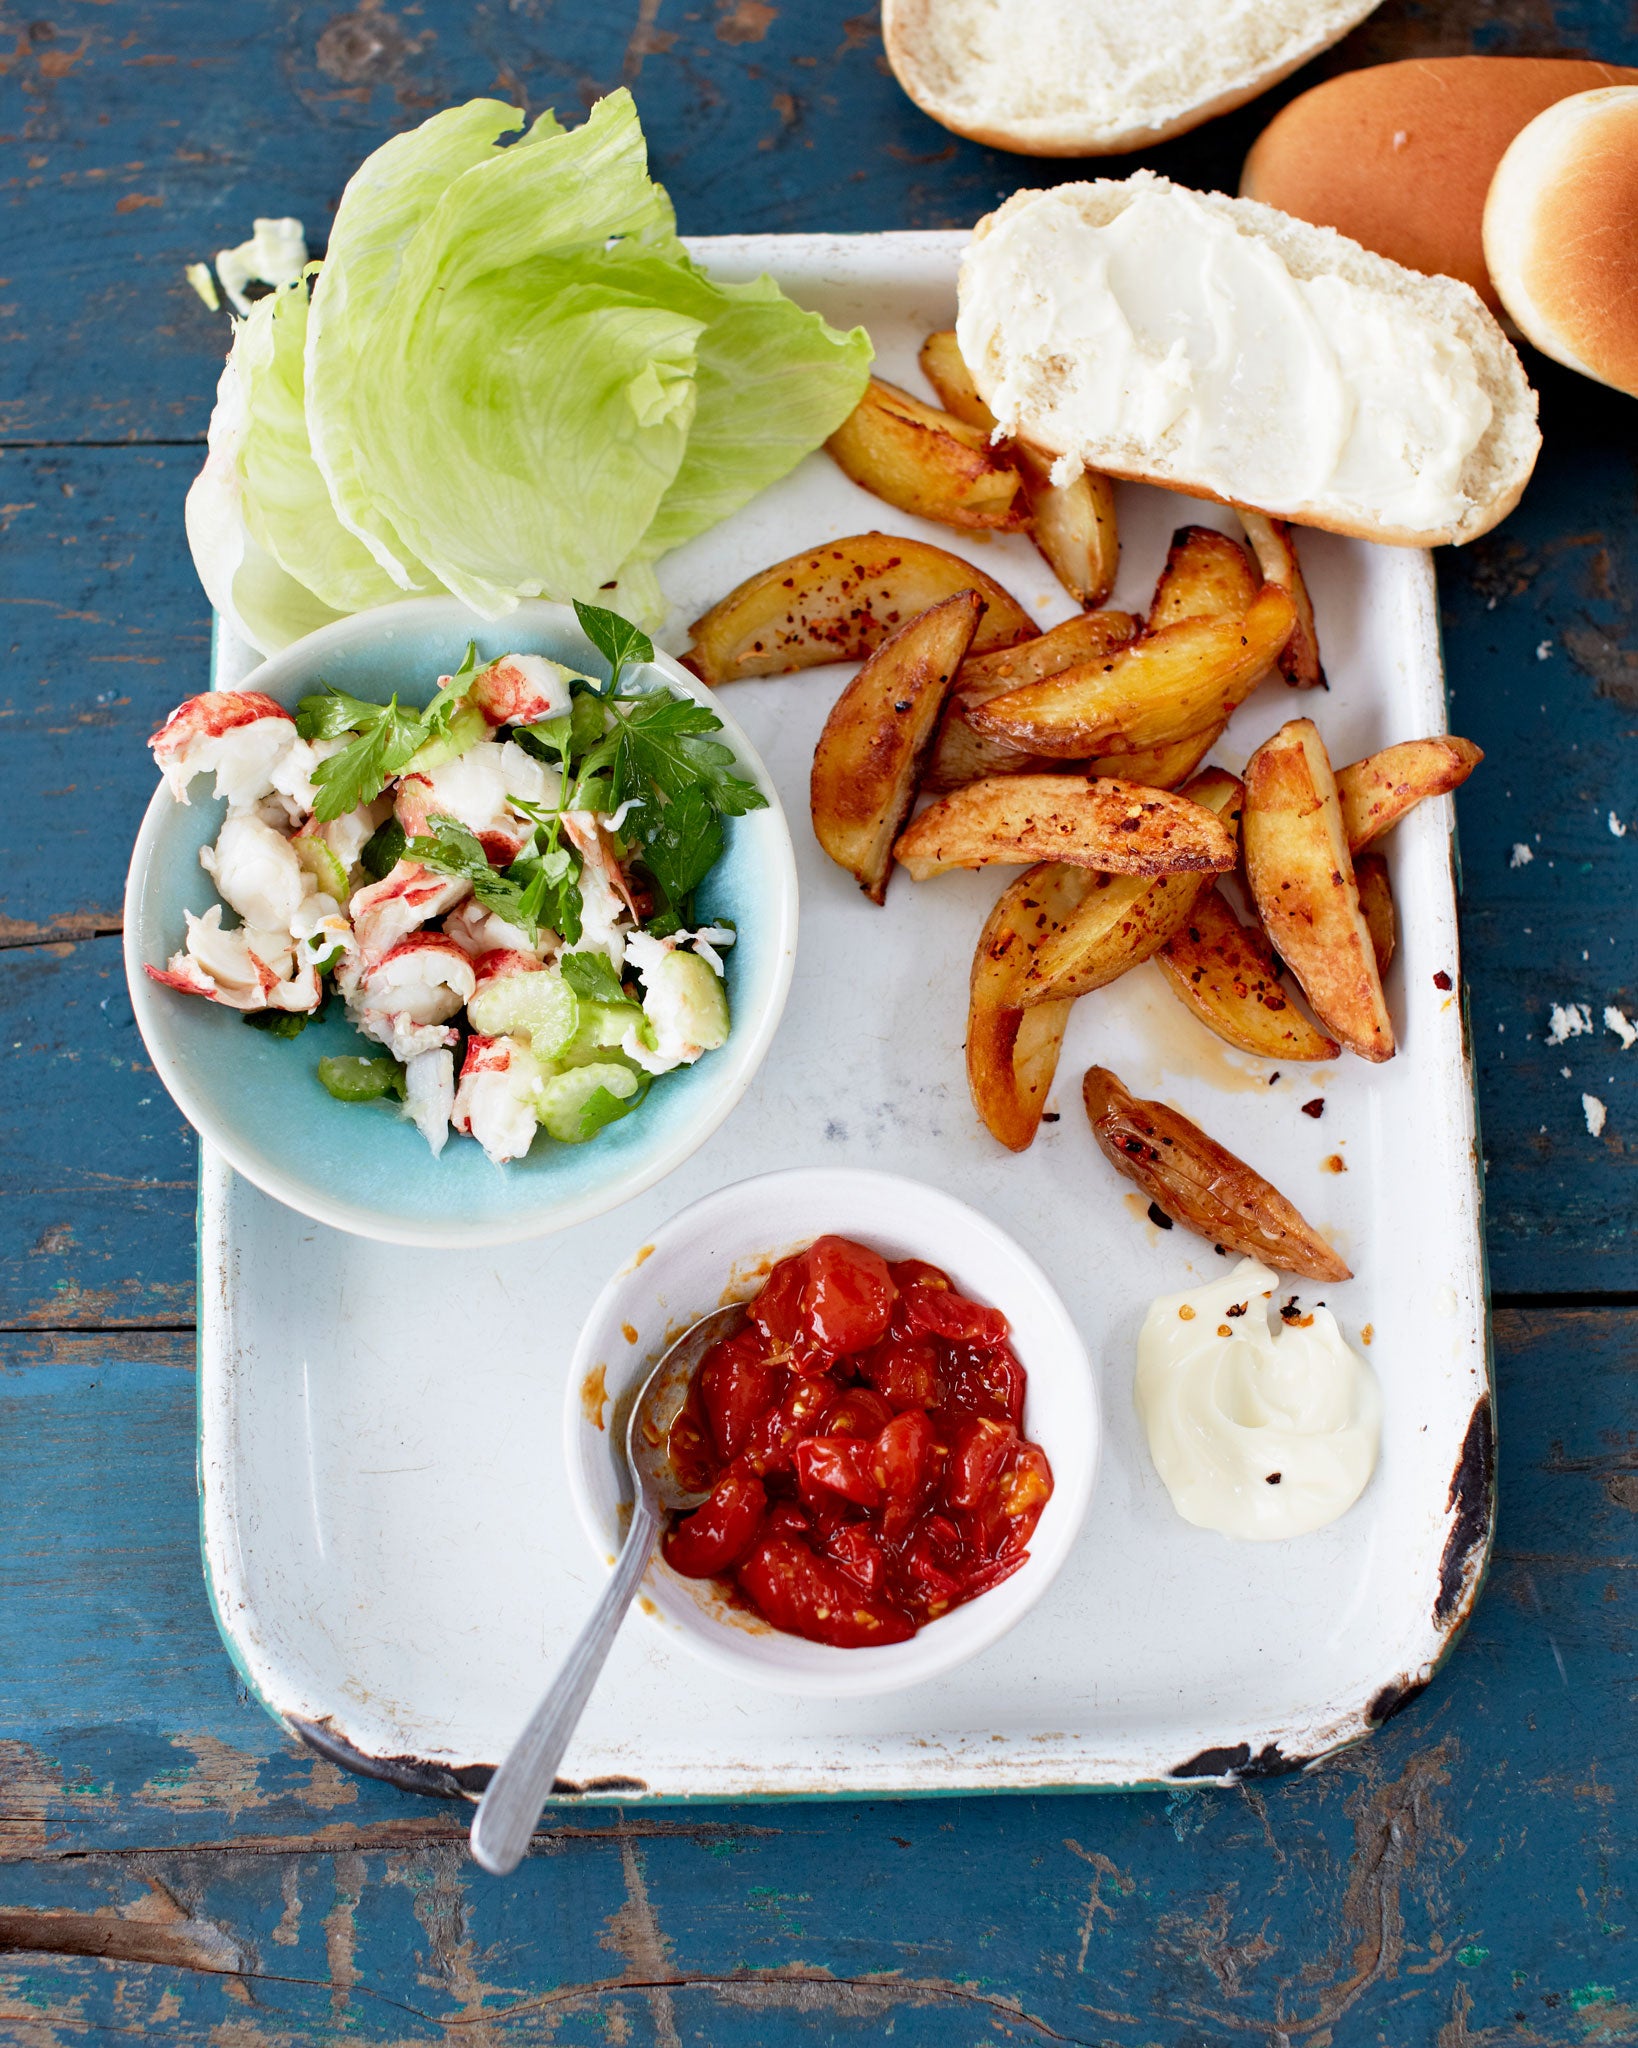 Serve up everything on individual plates so guests can put together their own lobster rolls, with a chilli relish and chips on the side